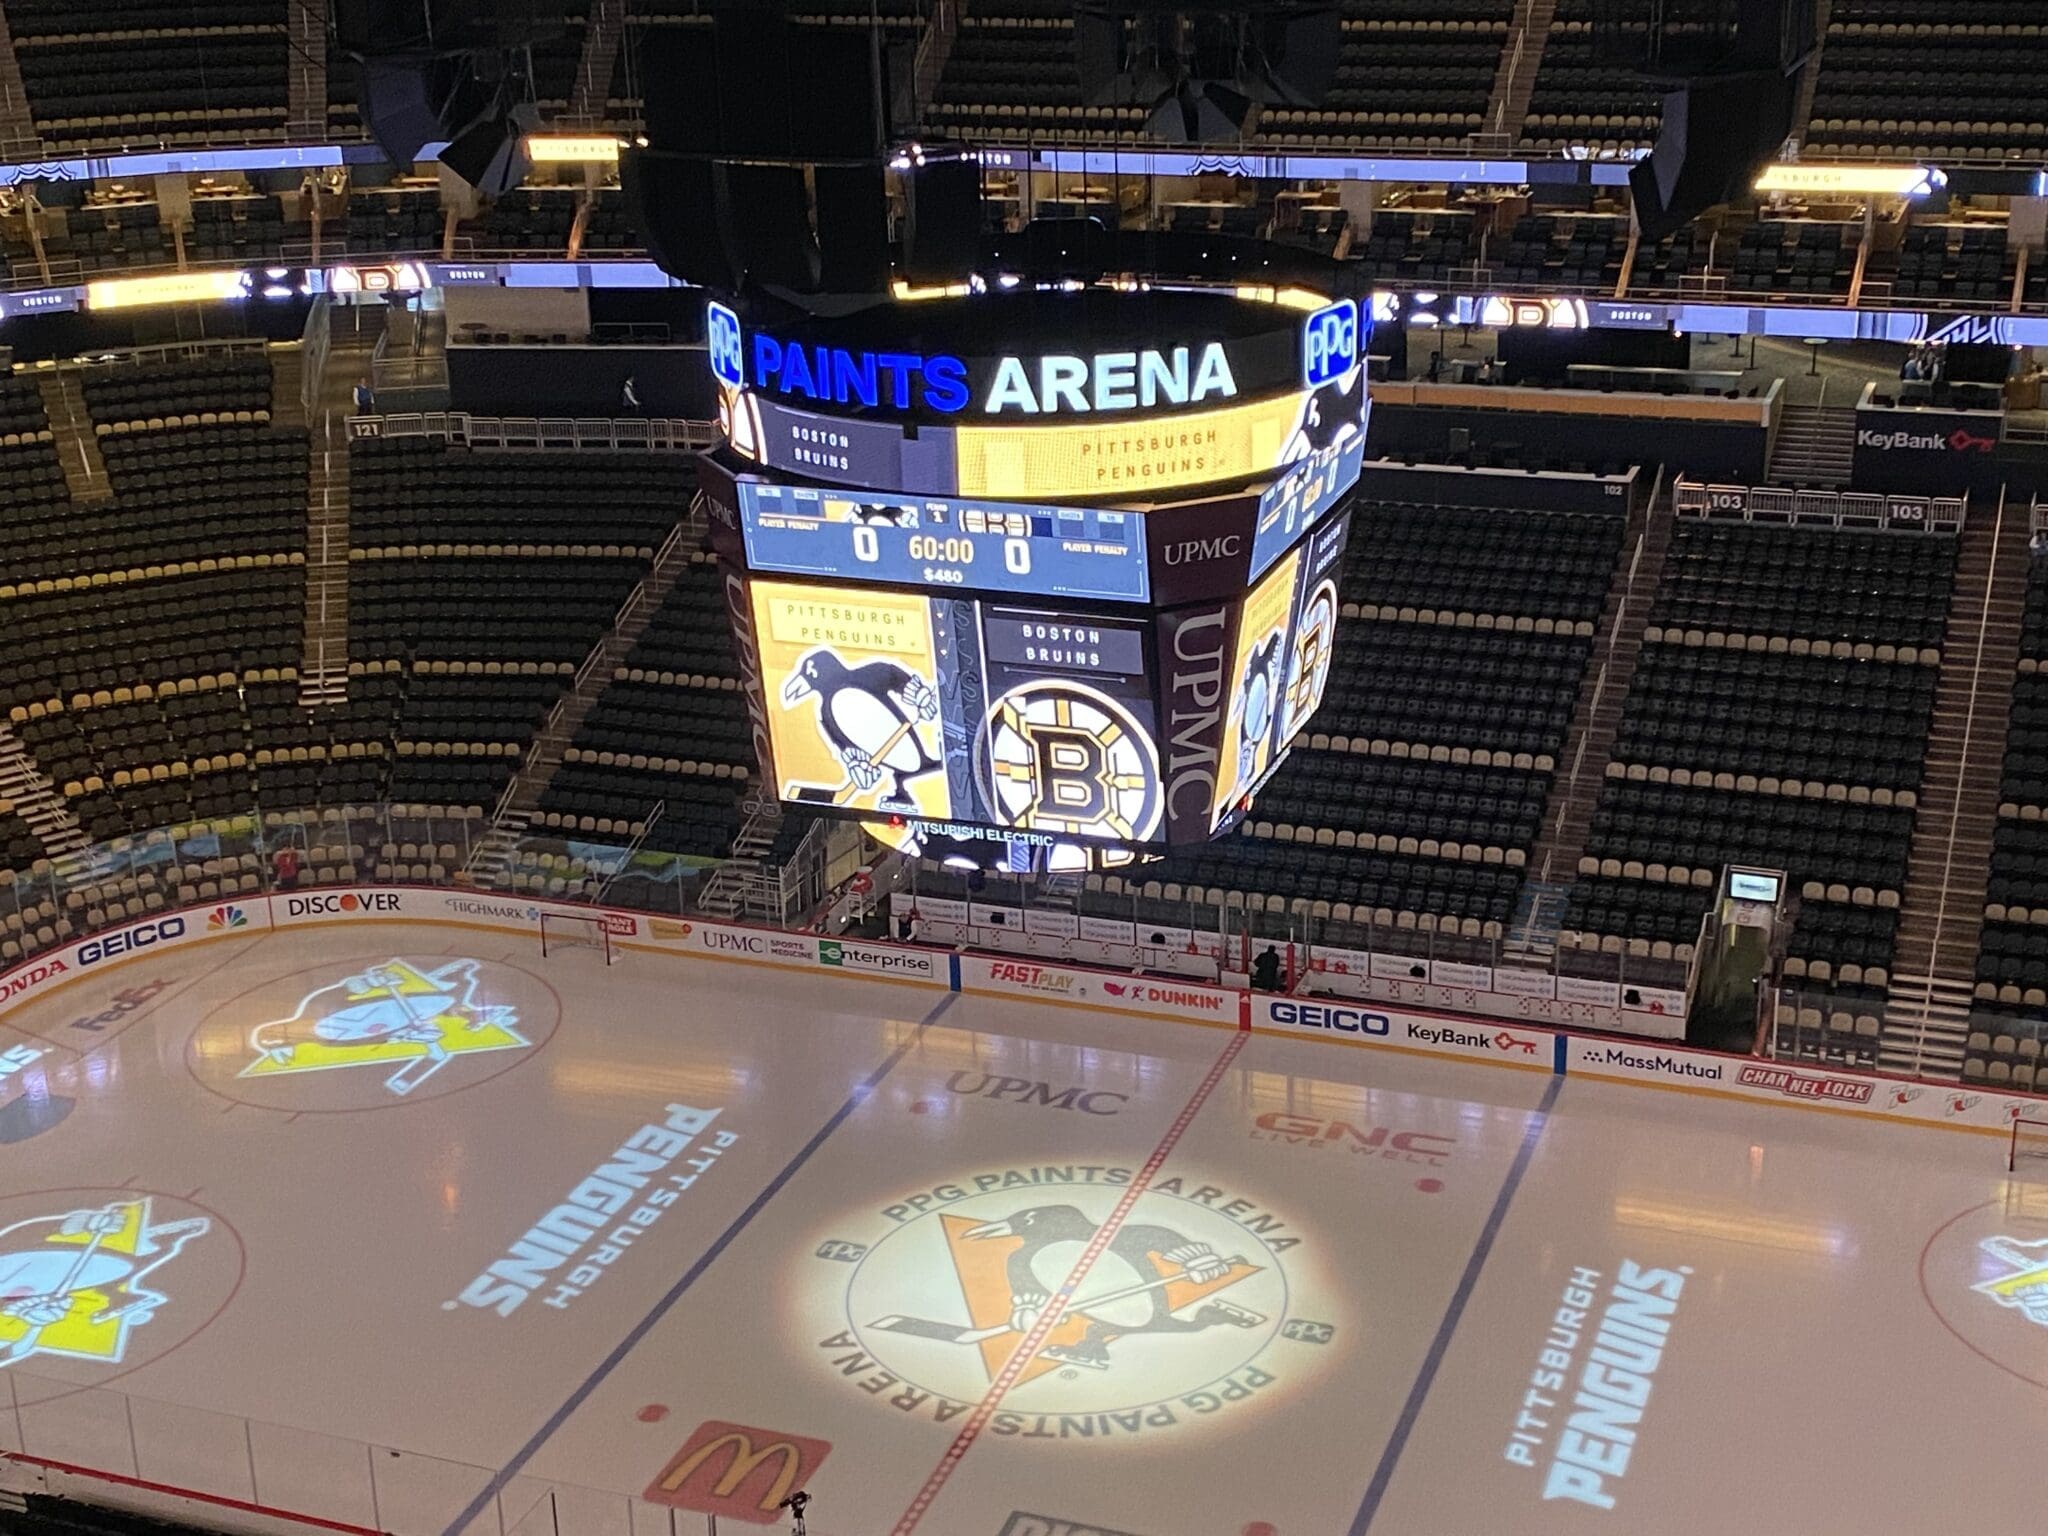 Section 102 at PPG Paints Arena 